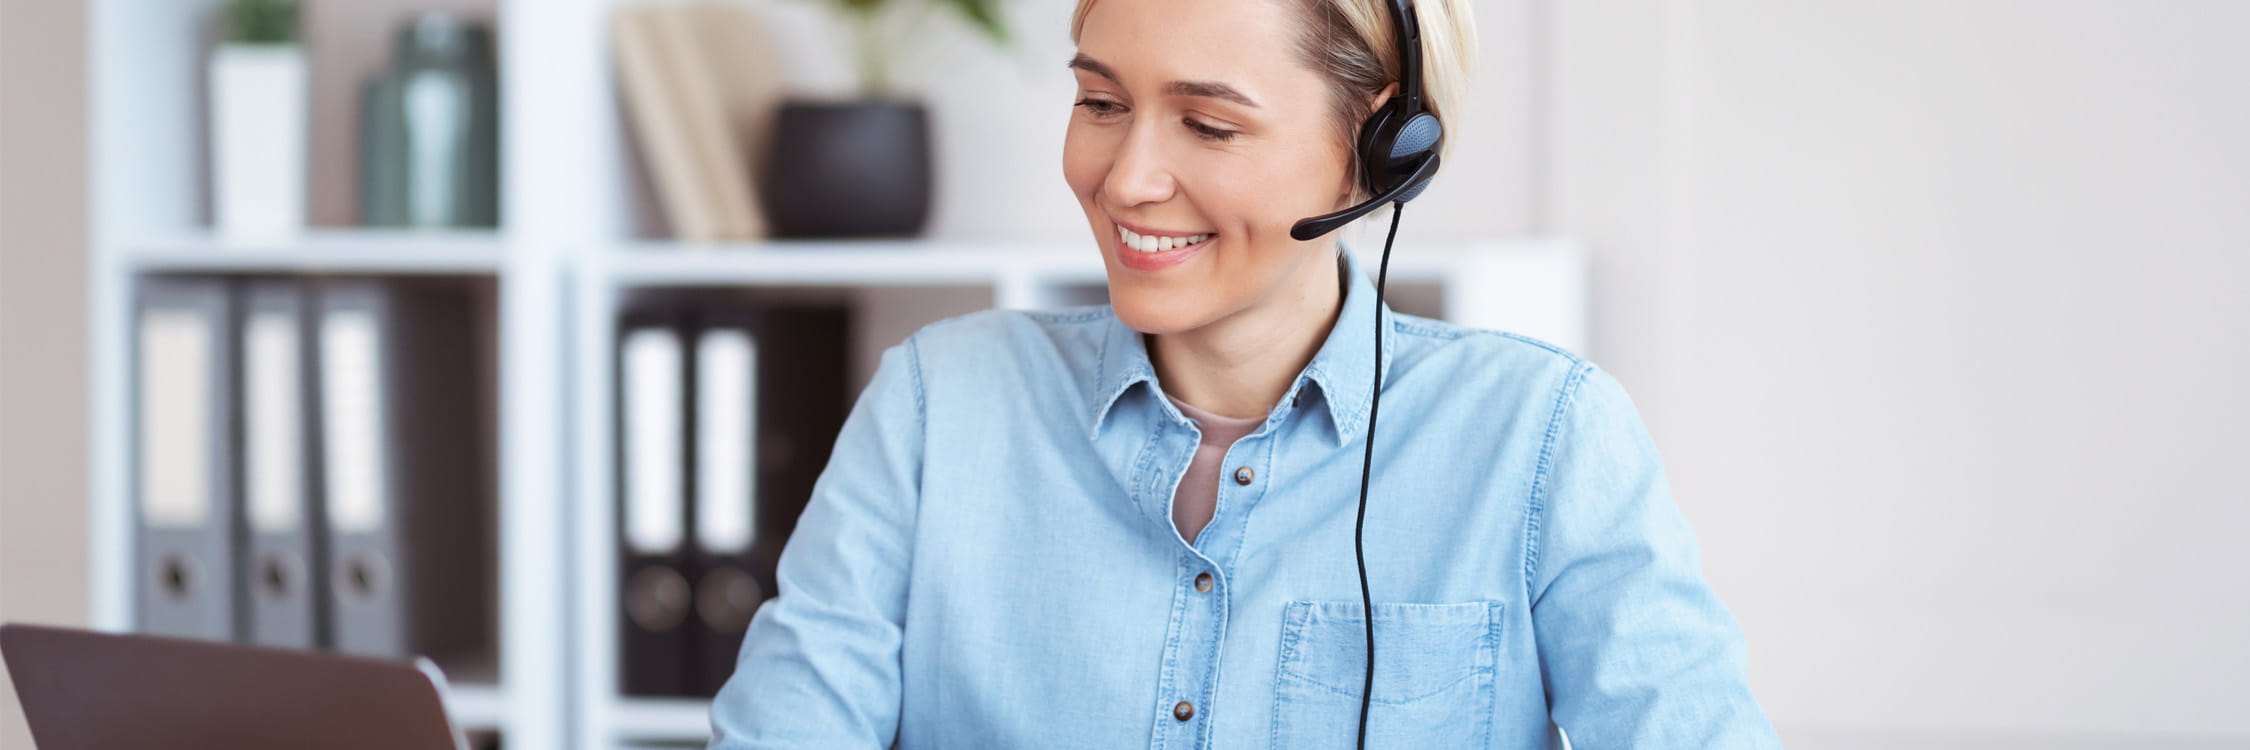 A woman with a headset on, engaged in online training.